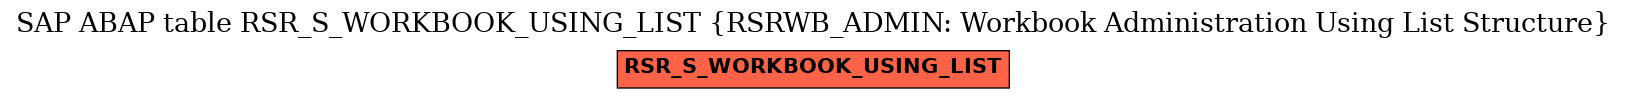 E-R Diagram for table RSR_S_WORKBOOK_USING_LIST (RSRWB_ADMIN: Workbook Administration Using List Structure)